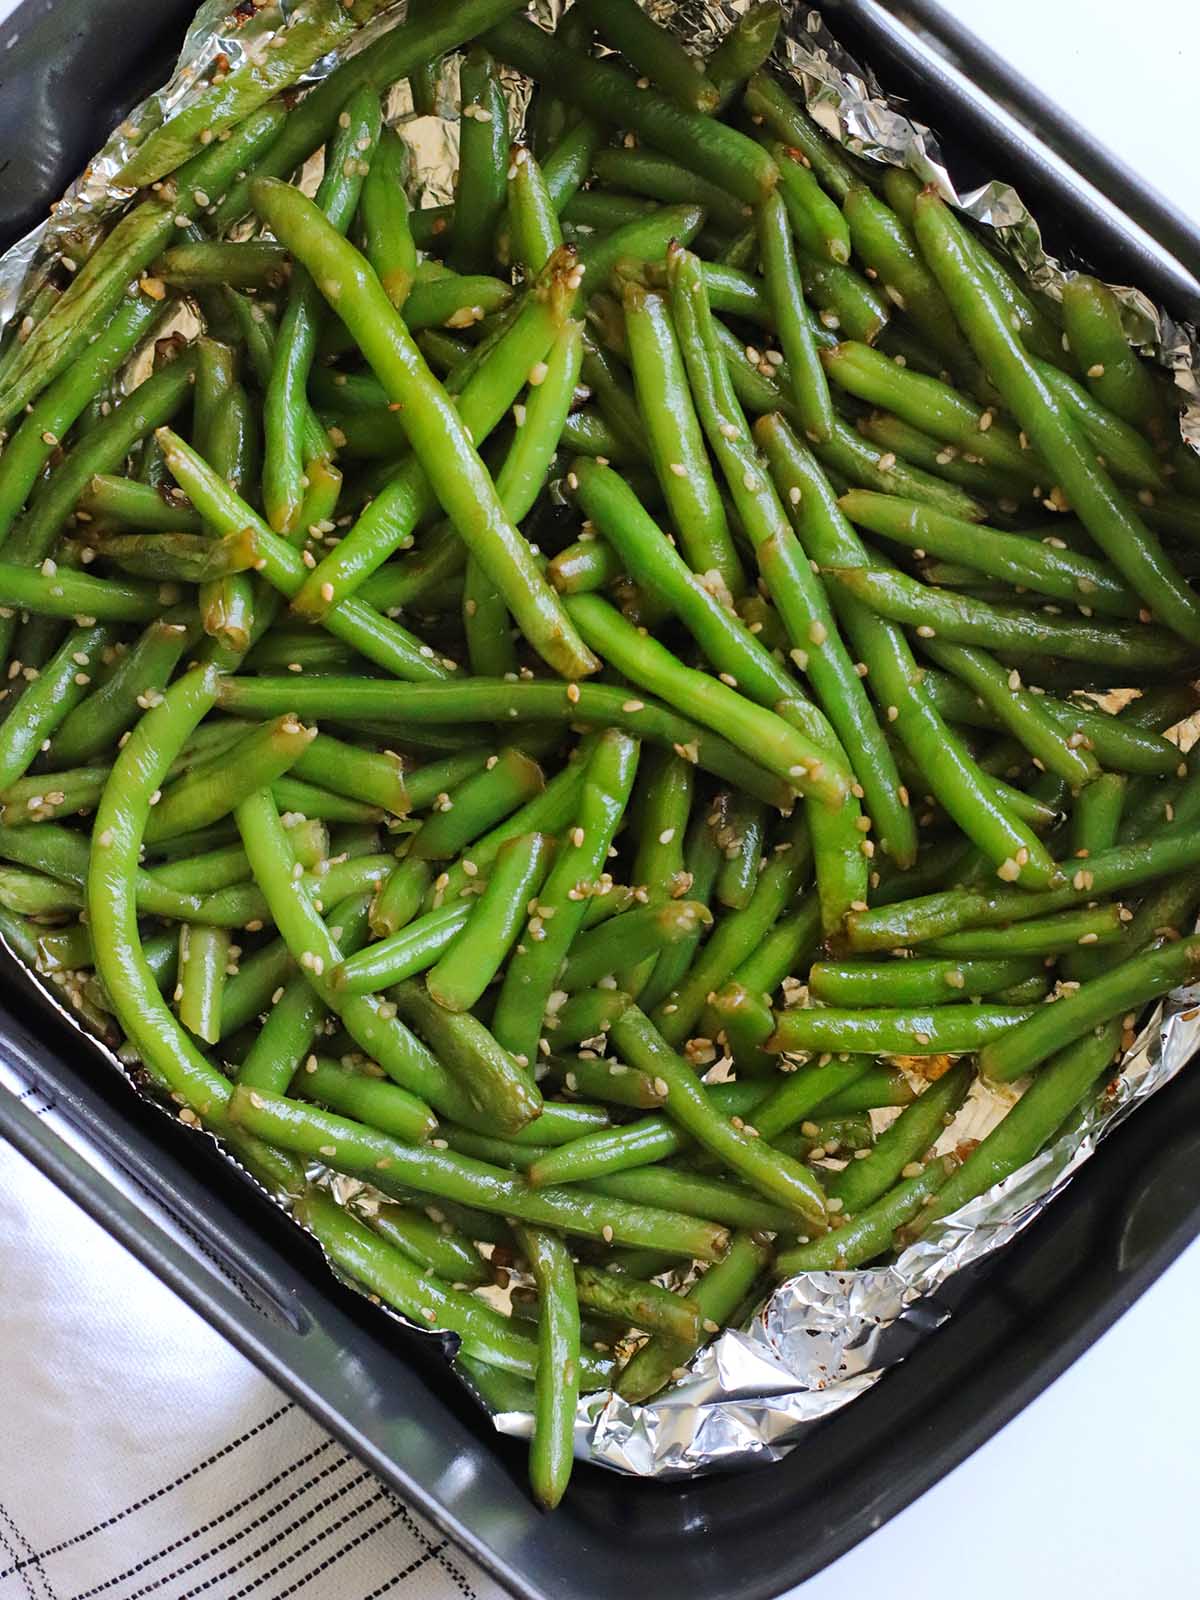 Cooked Green Beans on a baking tray lined with foil.